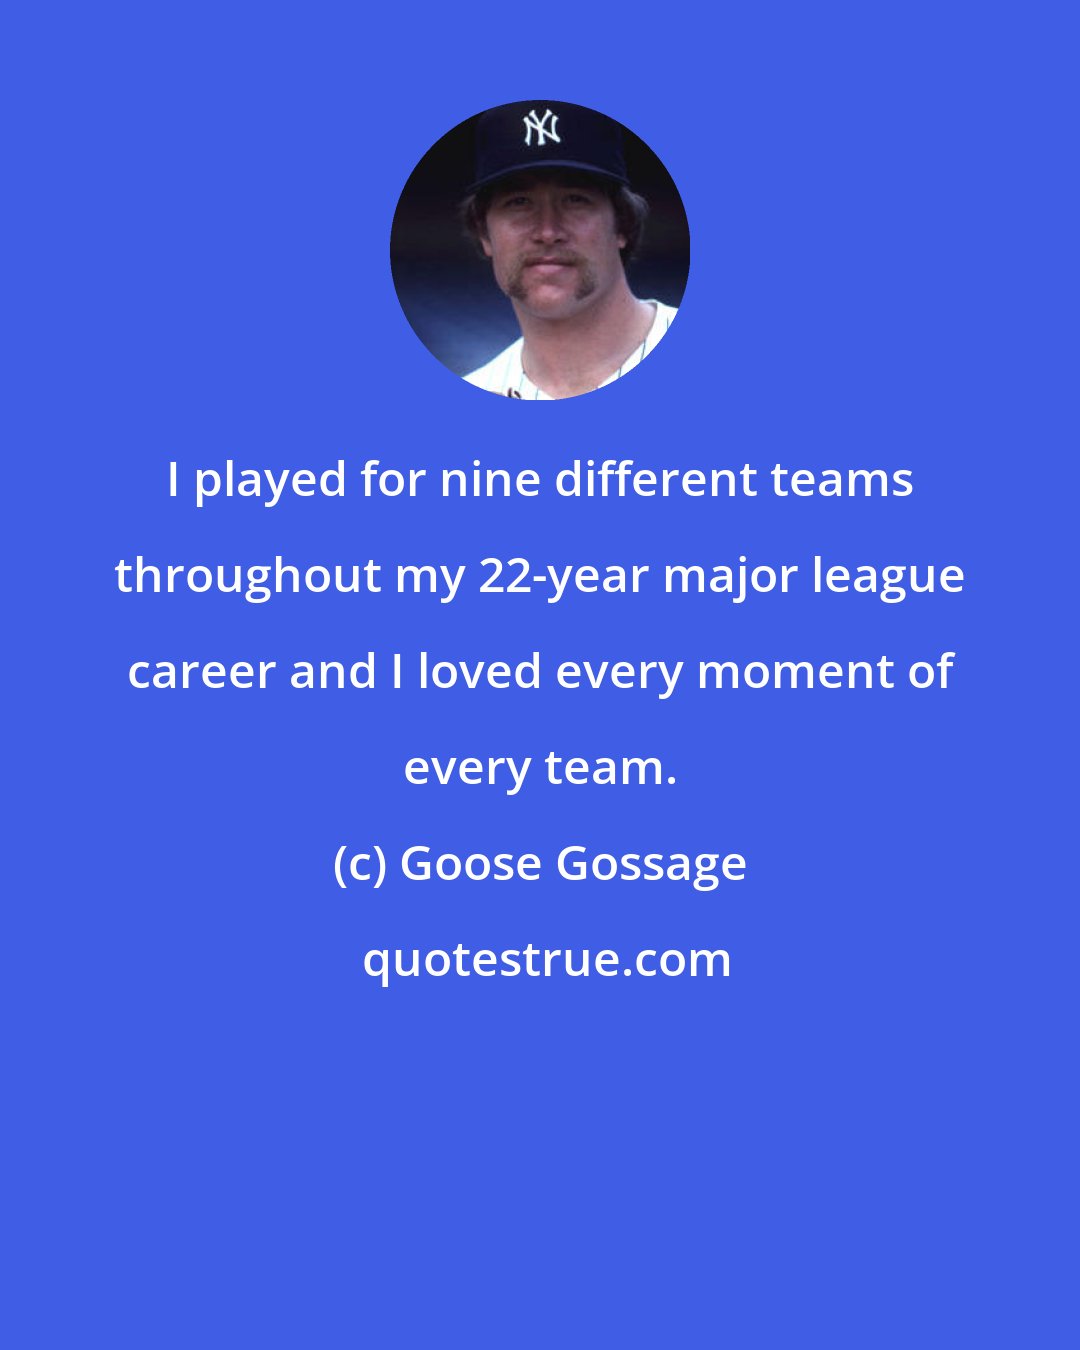 Goose Gossage: I played for nine different teams throughout my 22-year major league career and I loved every moment of every team.